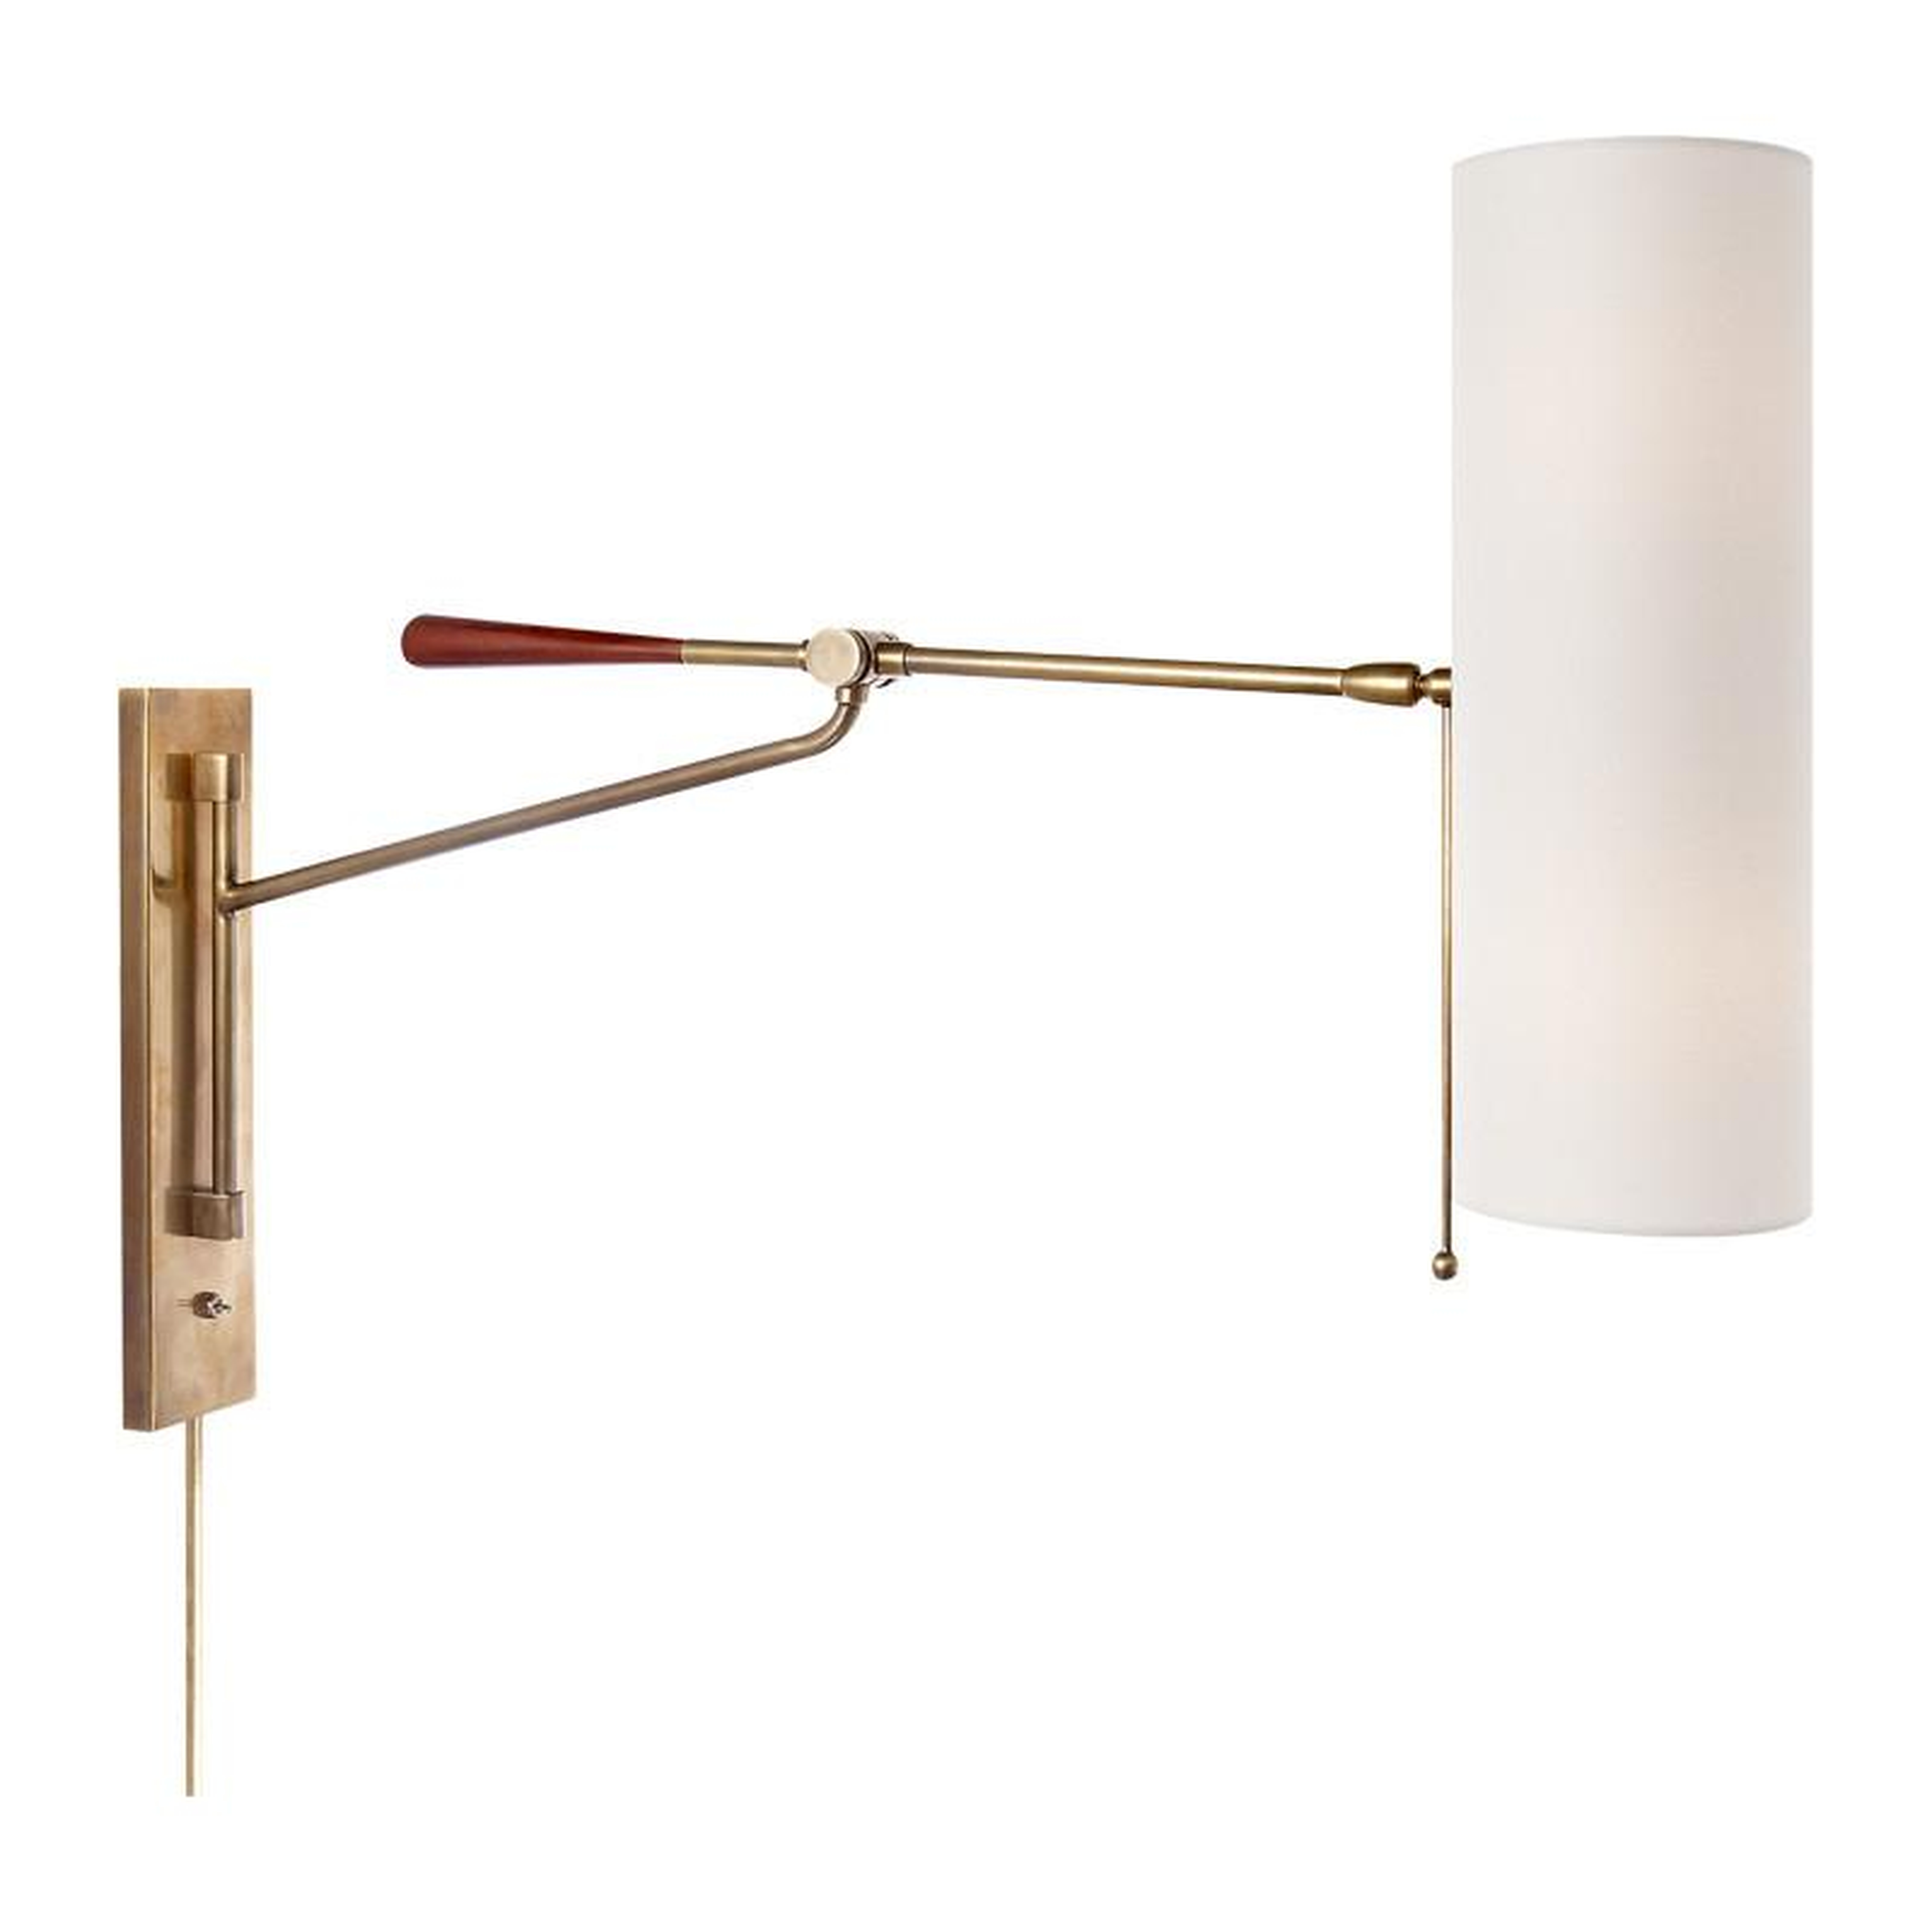 FRANKFORT ARTICULATING WALL LIGHT - HAND-RUBBED ANTIQUE BRASS & MAHOGANY ACCENTS - McGee & Co.